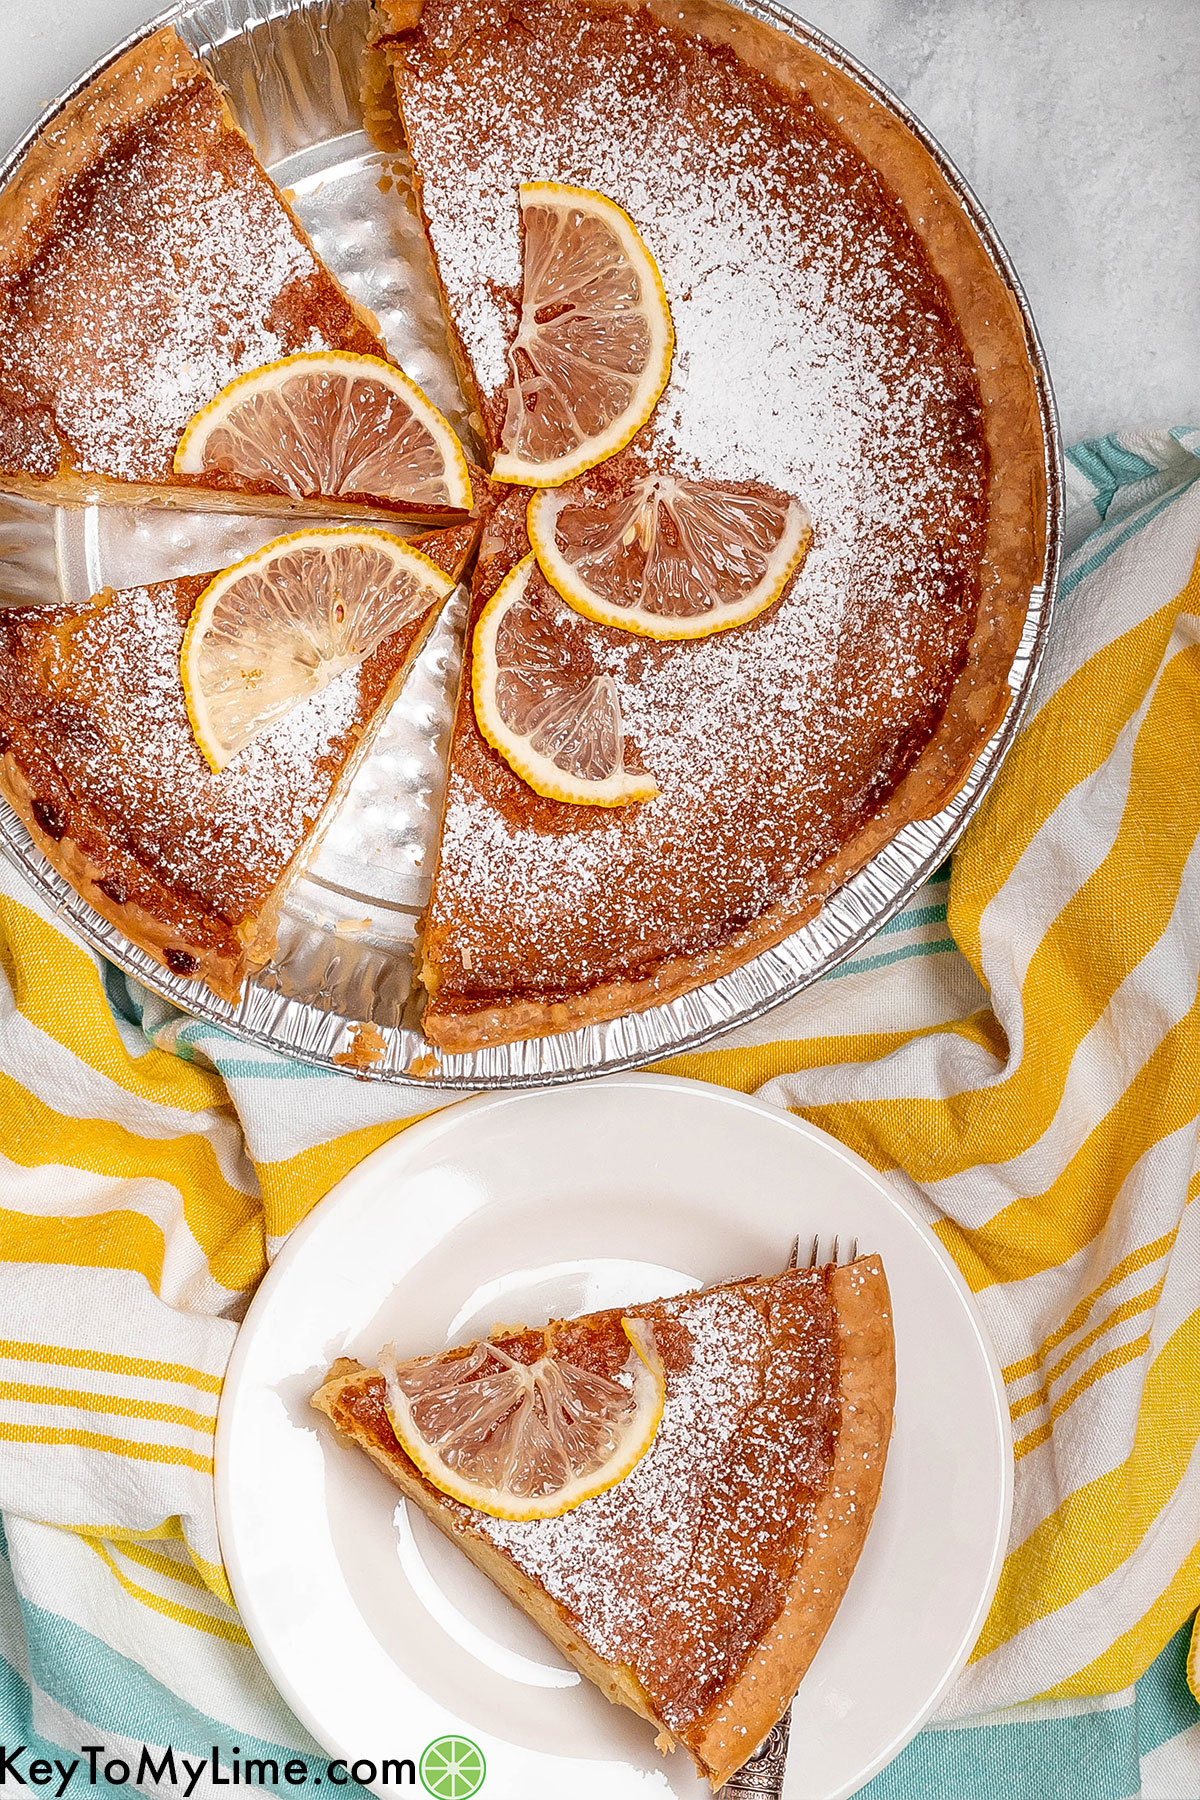 An overhead image of a partially cut pie garnished with lemon wedges and powdered sugar.